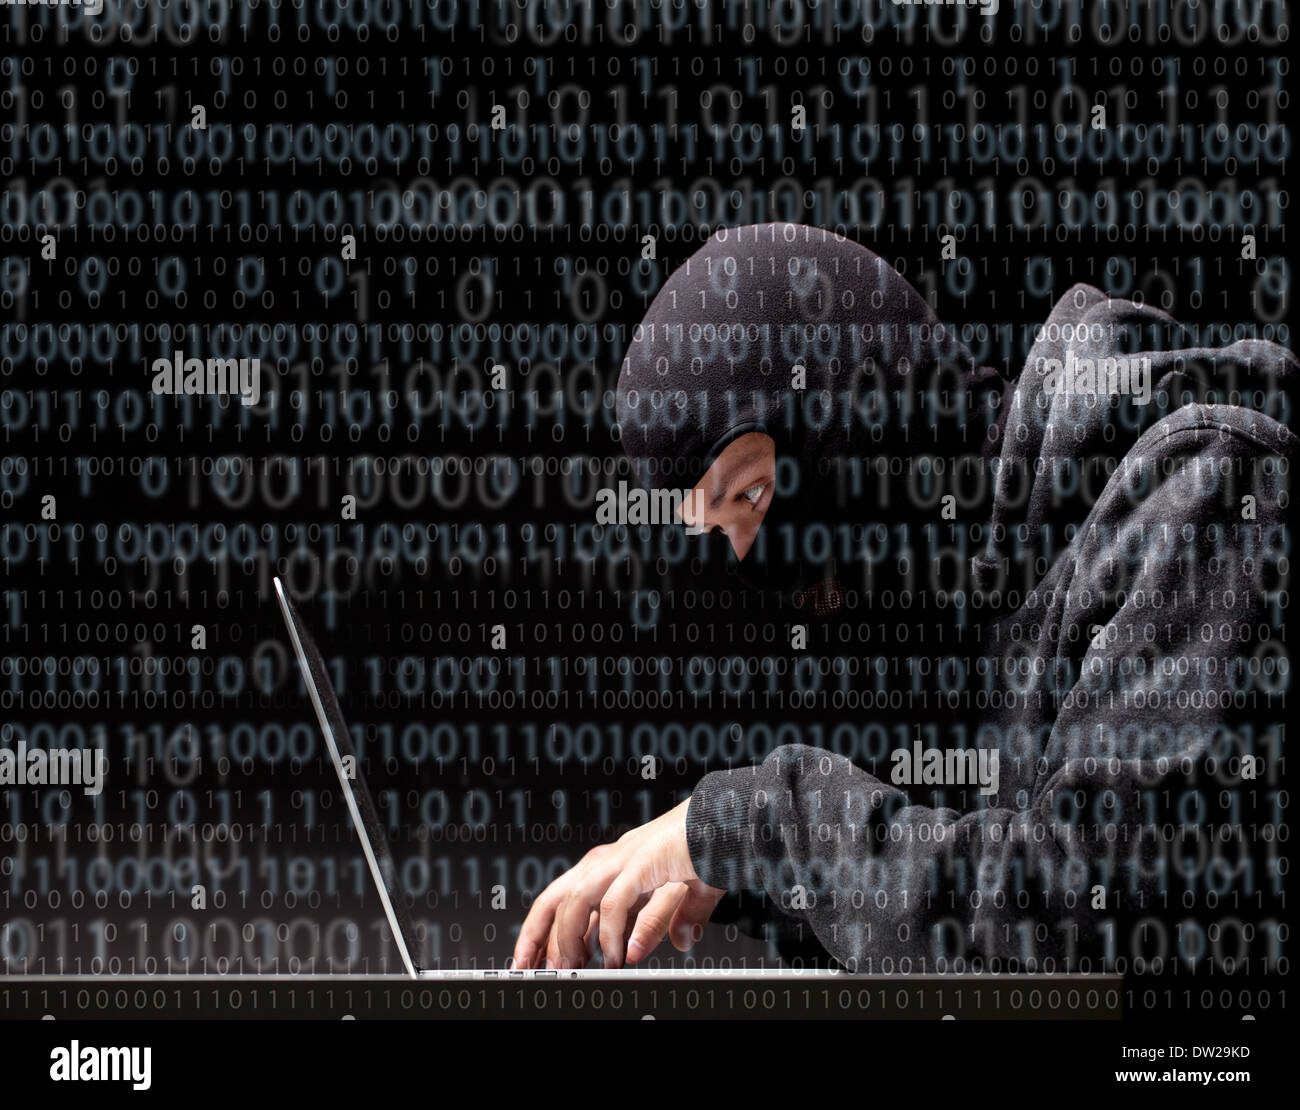 Computer hacker in a balaclava working in the darkness stealing data and personal identity information off a laptop computer Stock Photo